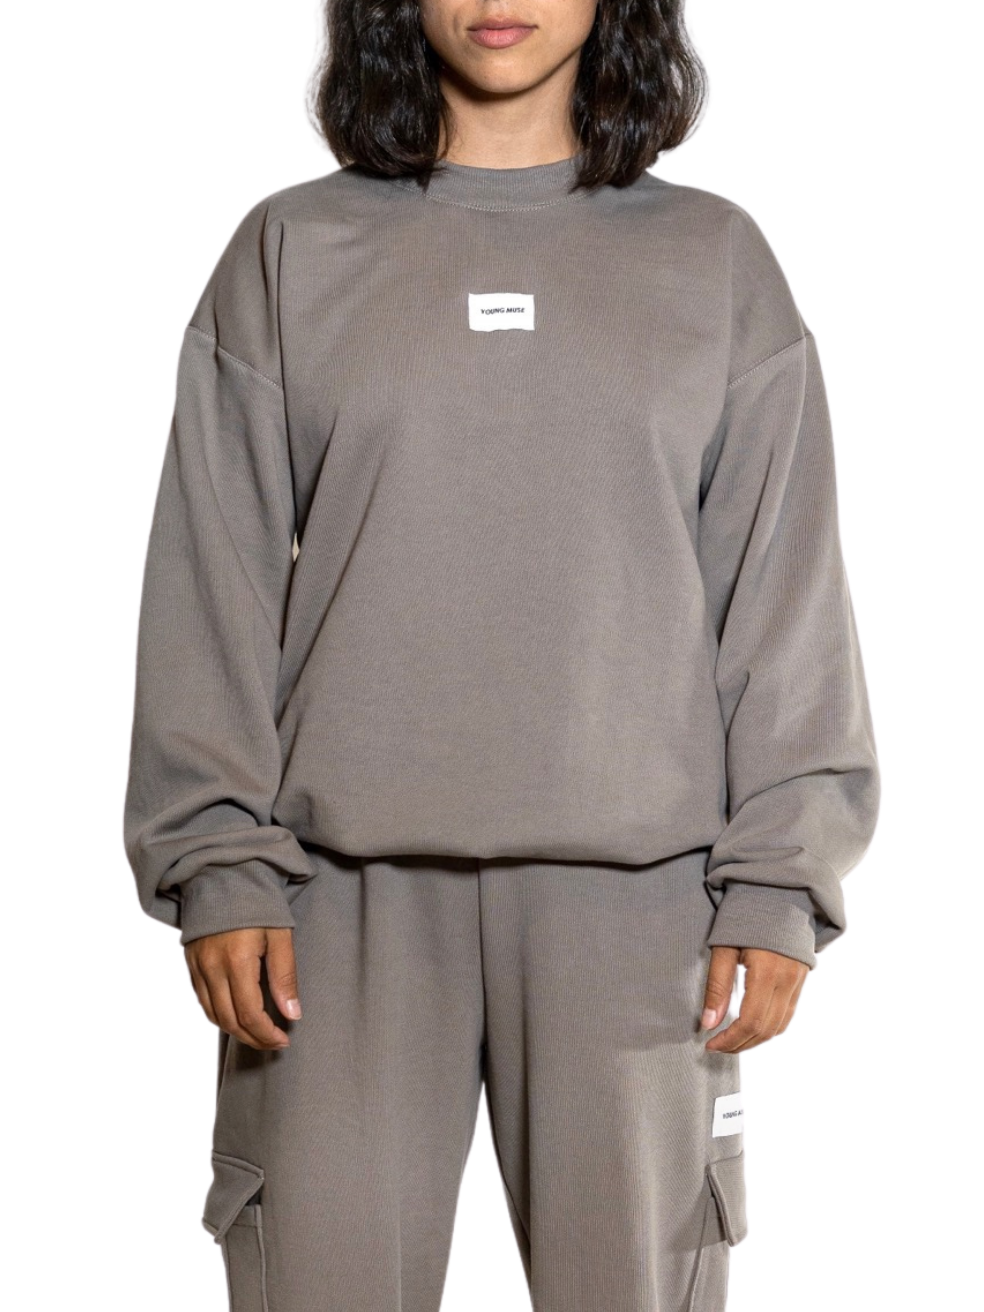 Logo French Terry Crewneck in Graphite